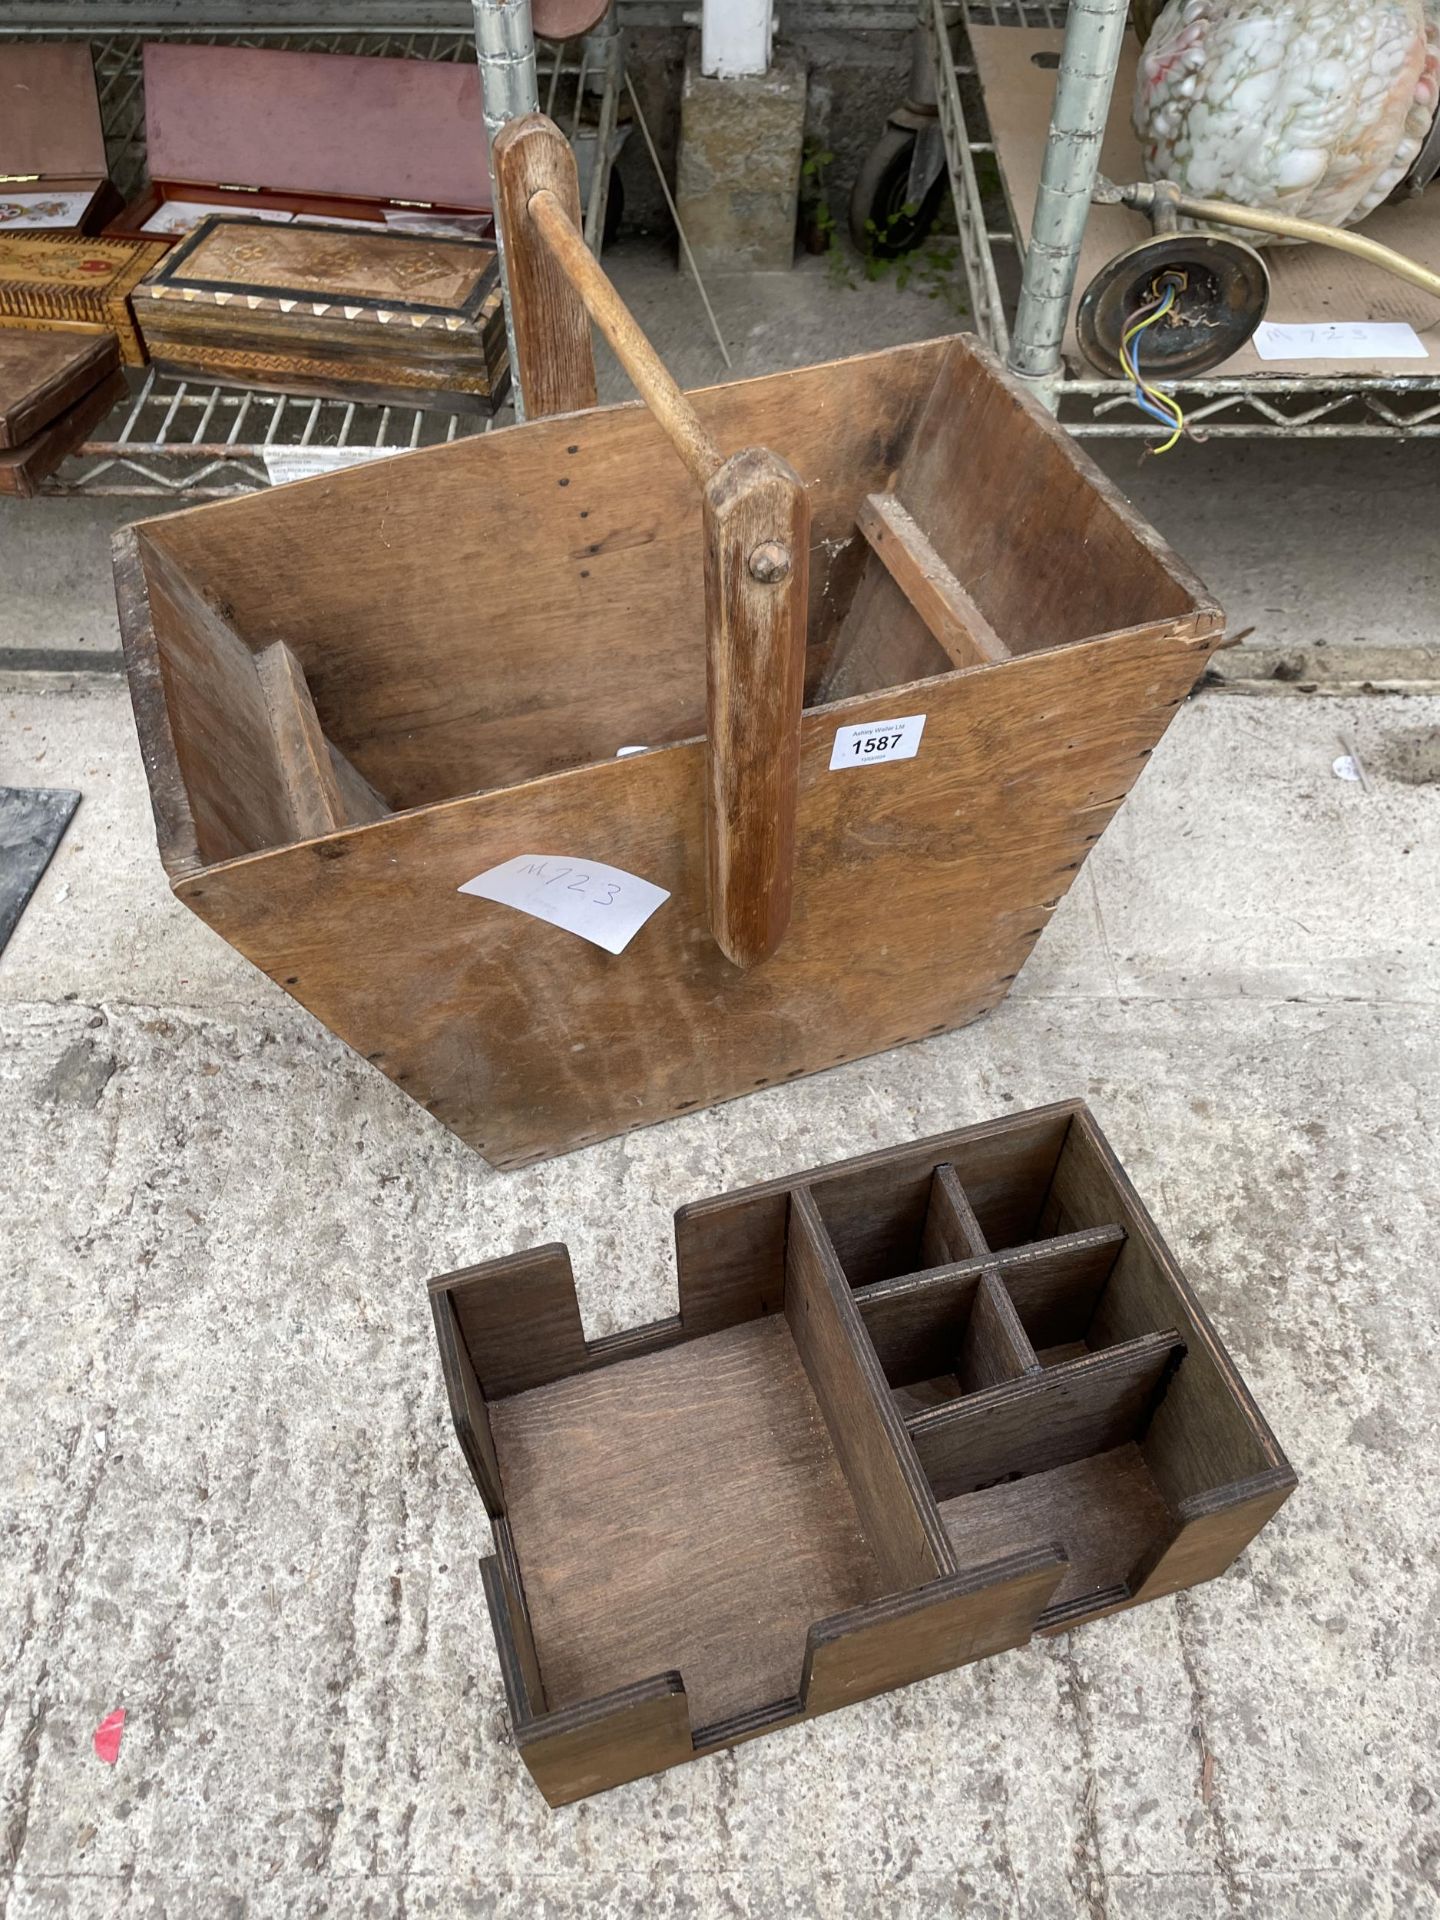 A VINTAGE WOODEN TRUG AND A DESK TIDY